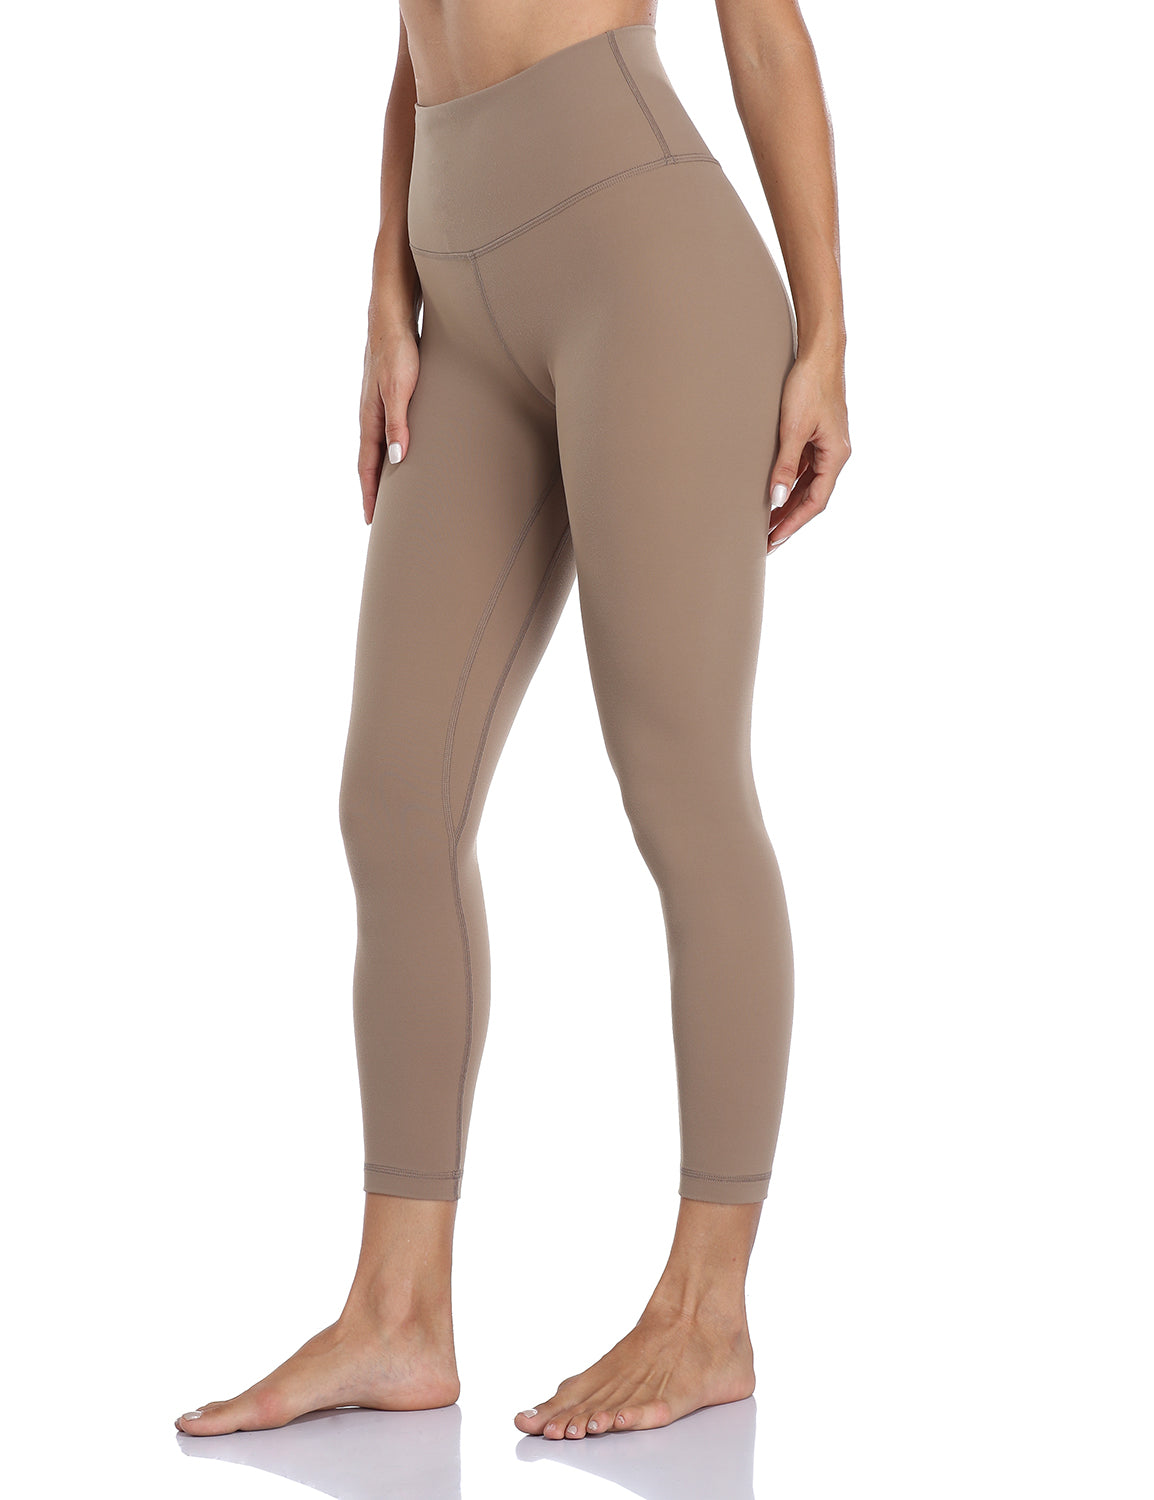 HeyNuts Pure&Plain 7/8 Athletic Leggings for Women, Buttery Soft